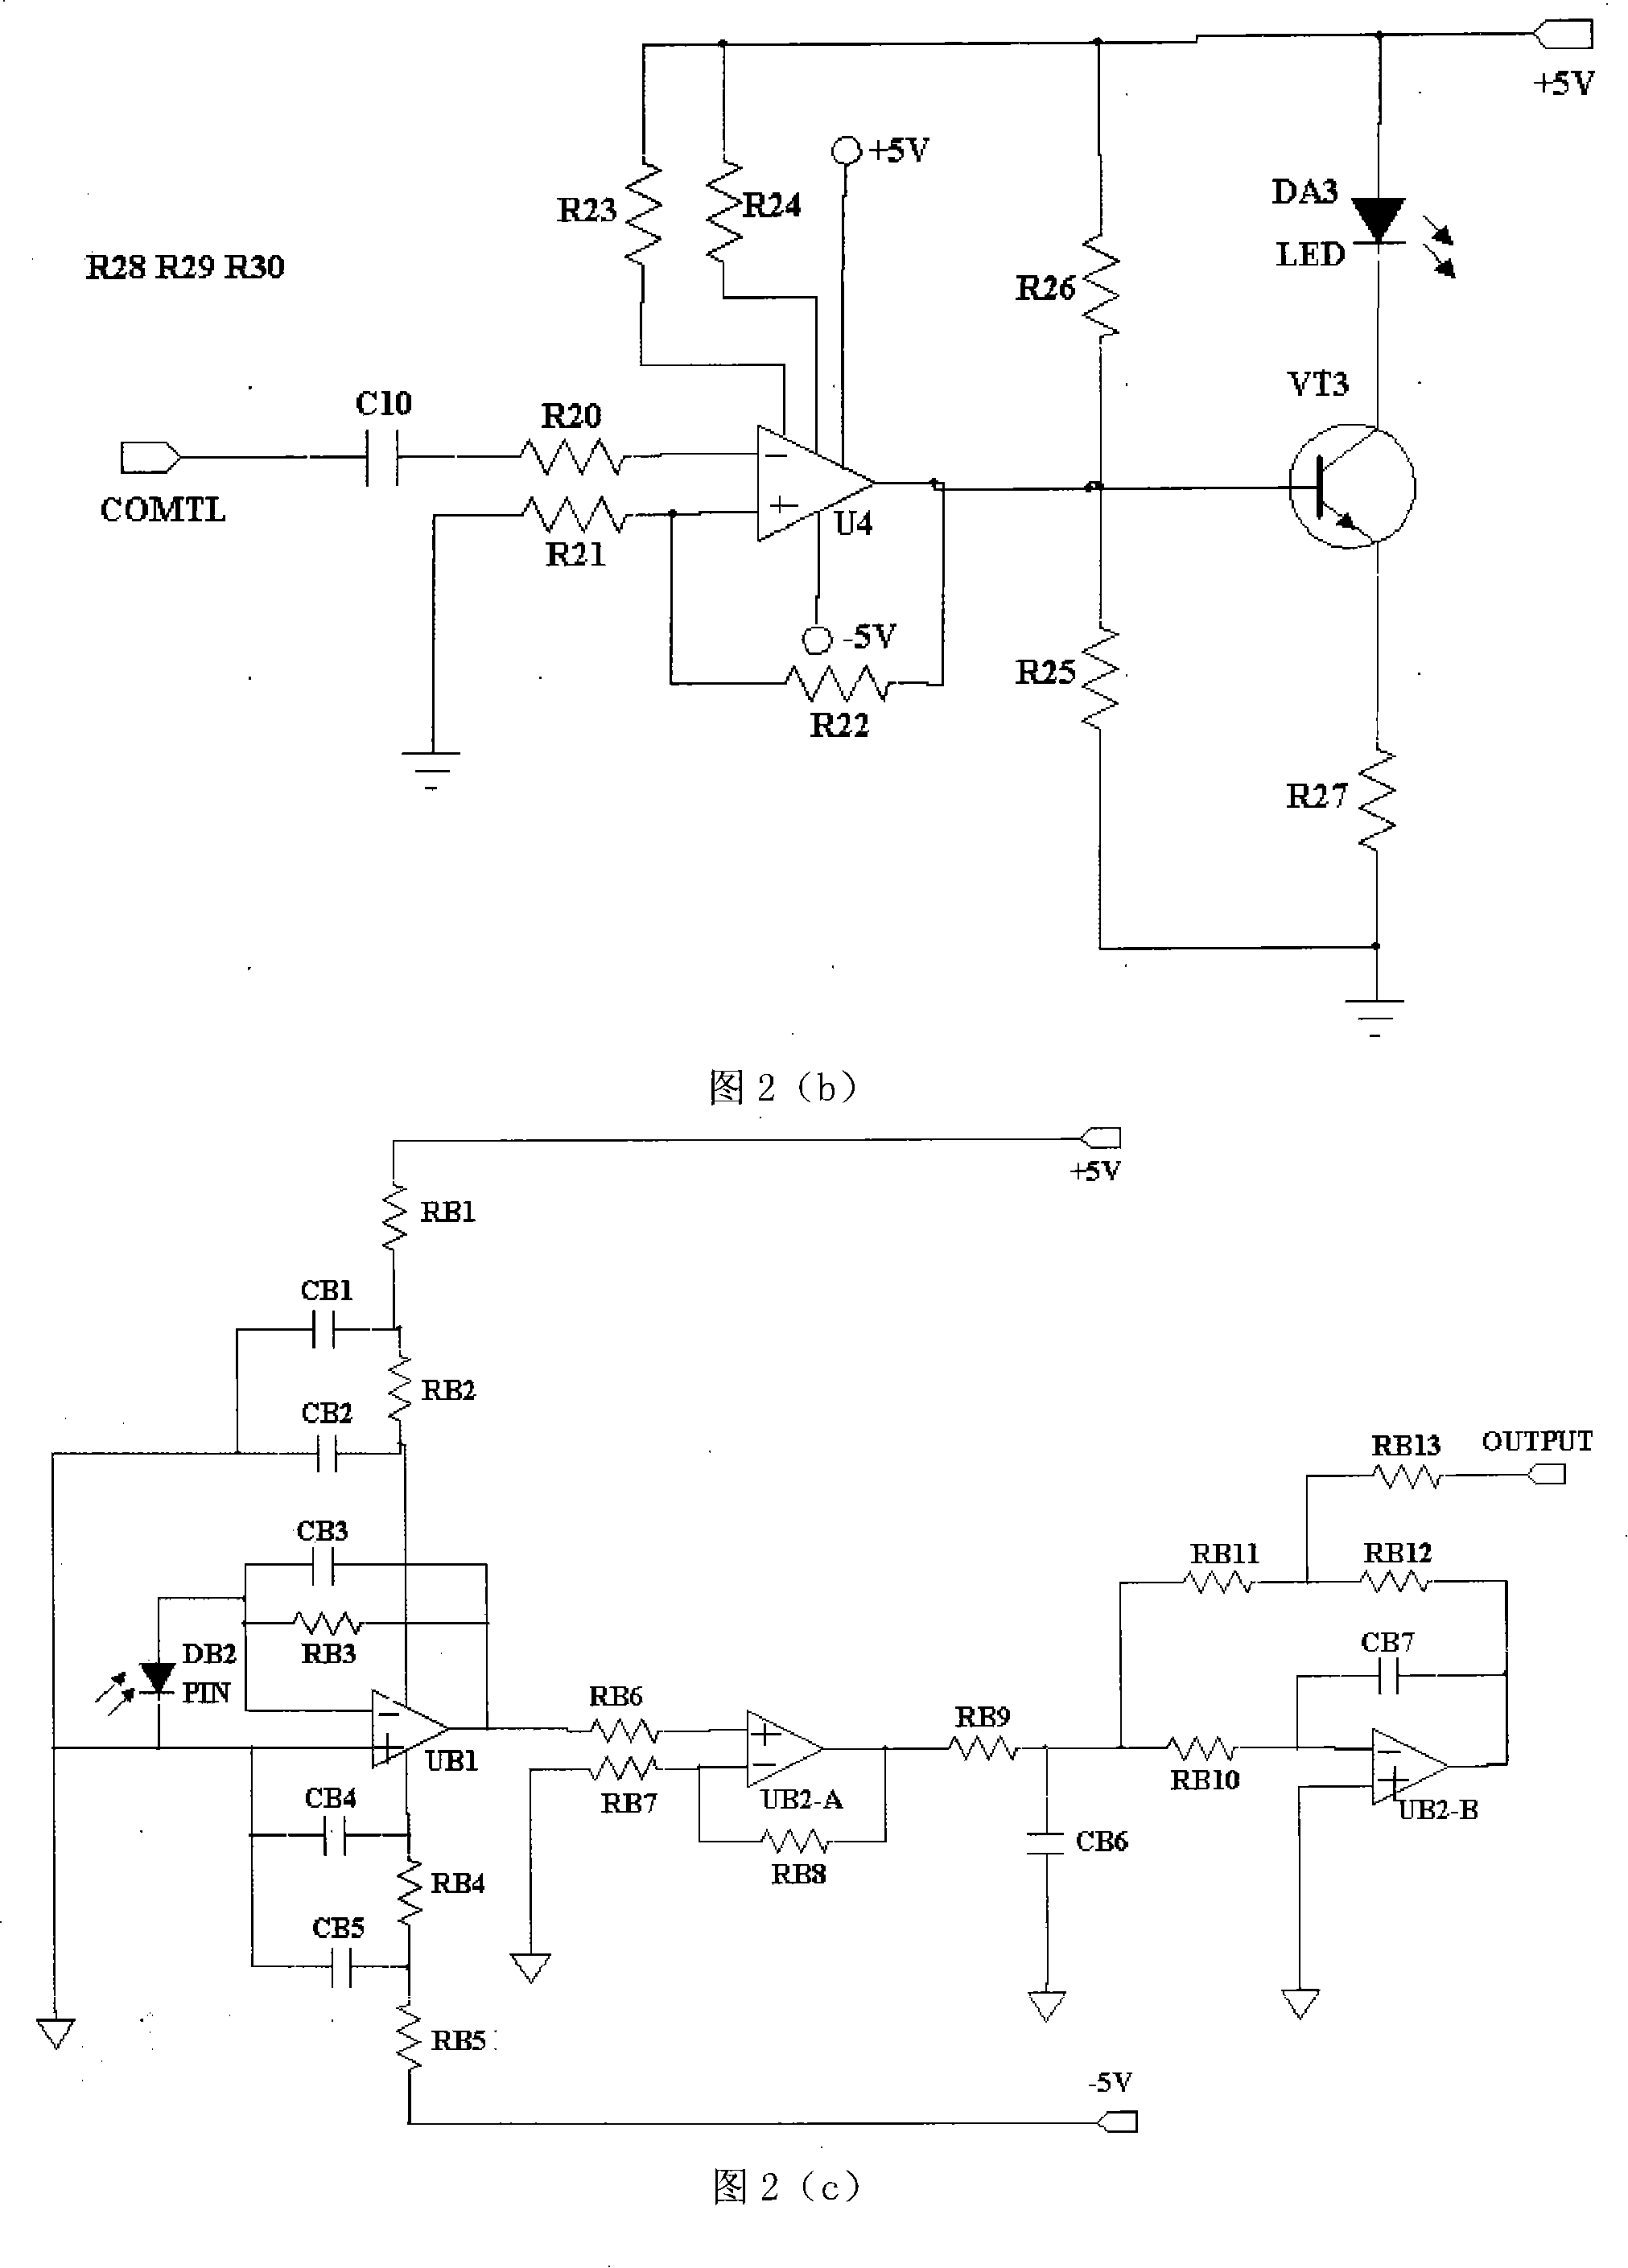 System for measuring responsive time of automatically light-changing goggles